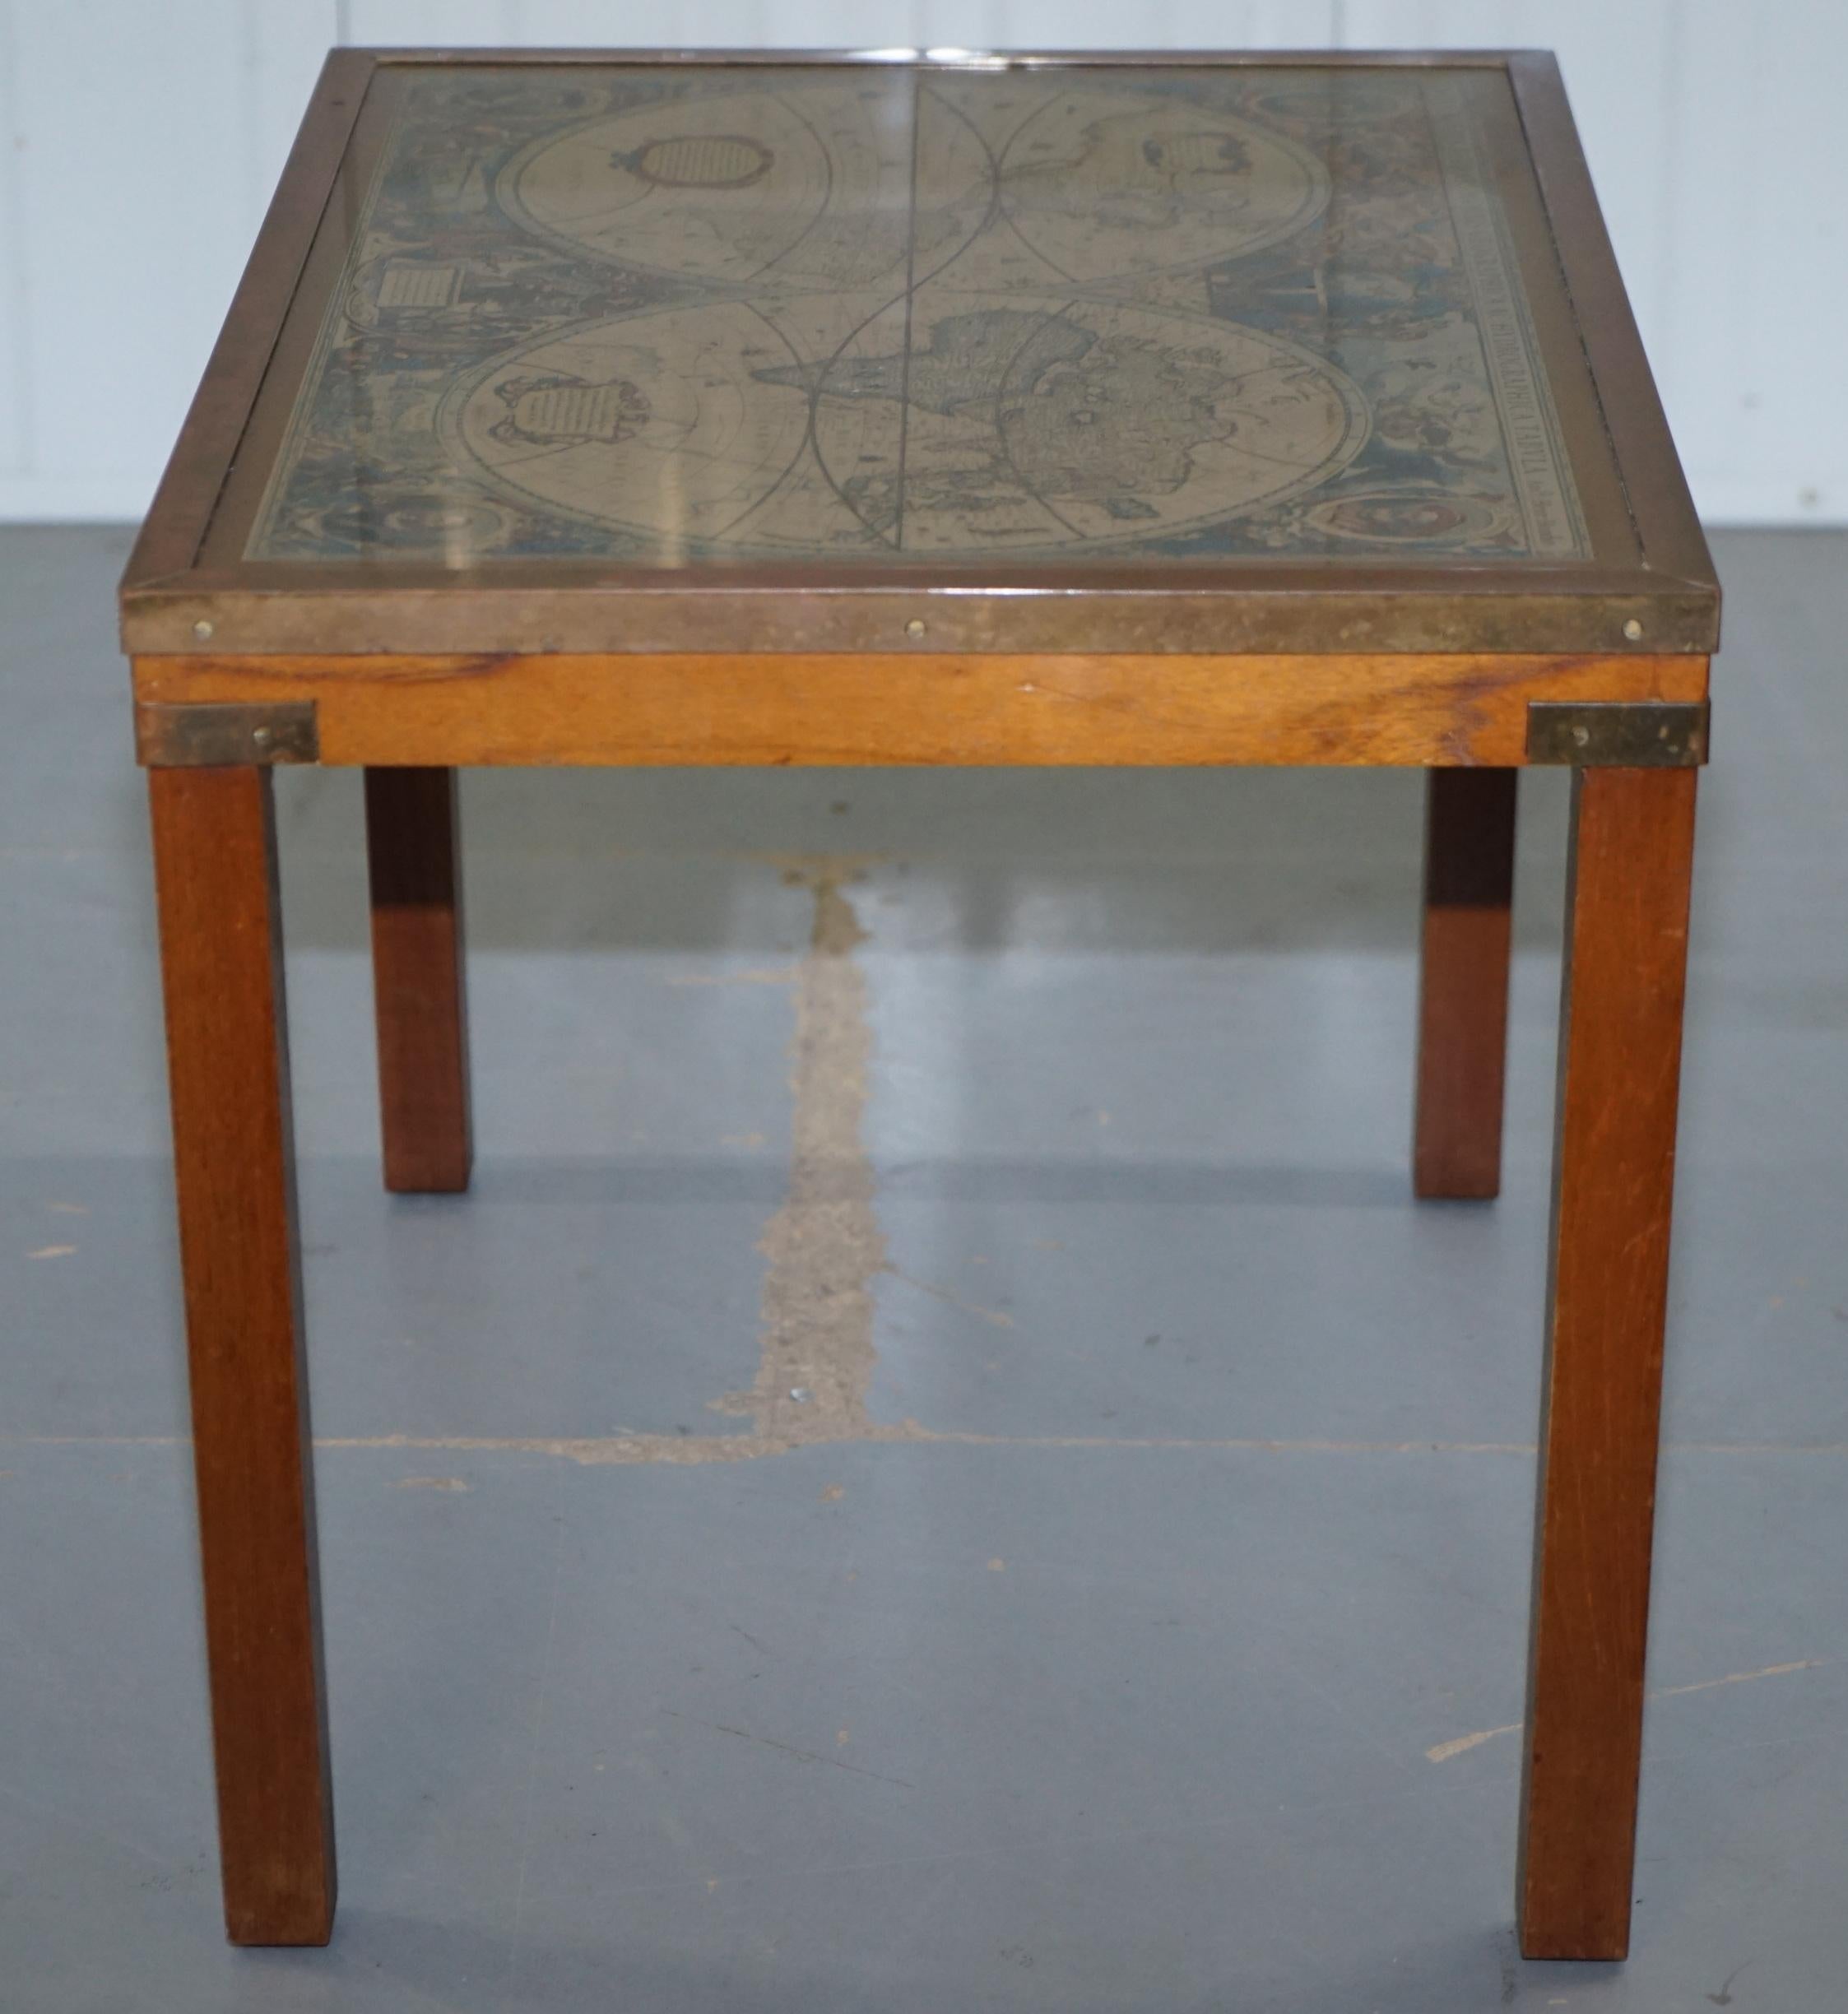 Nest of Three Vintage Campaign Tables with Global Maps Design Brass Corners 2